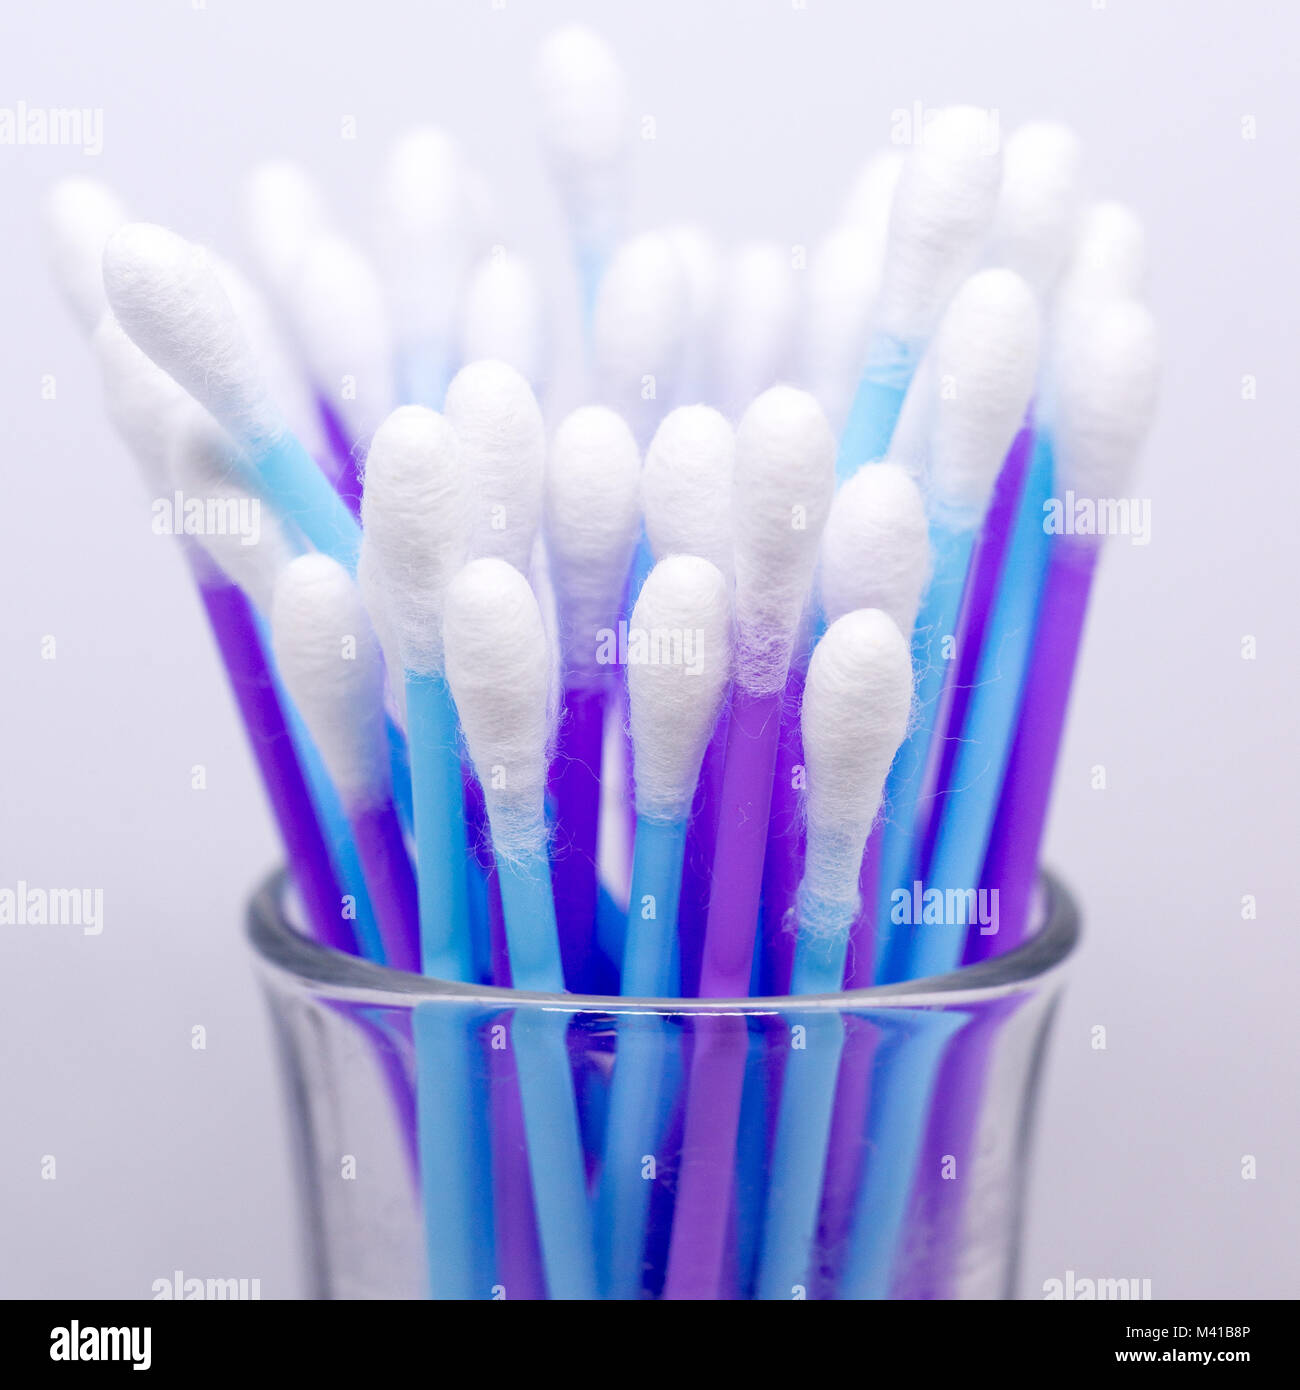 Upright purple and blue cotton buds in a small glass jar. Stock Photo